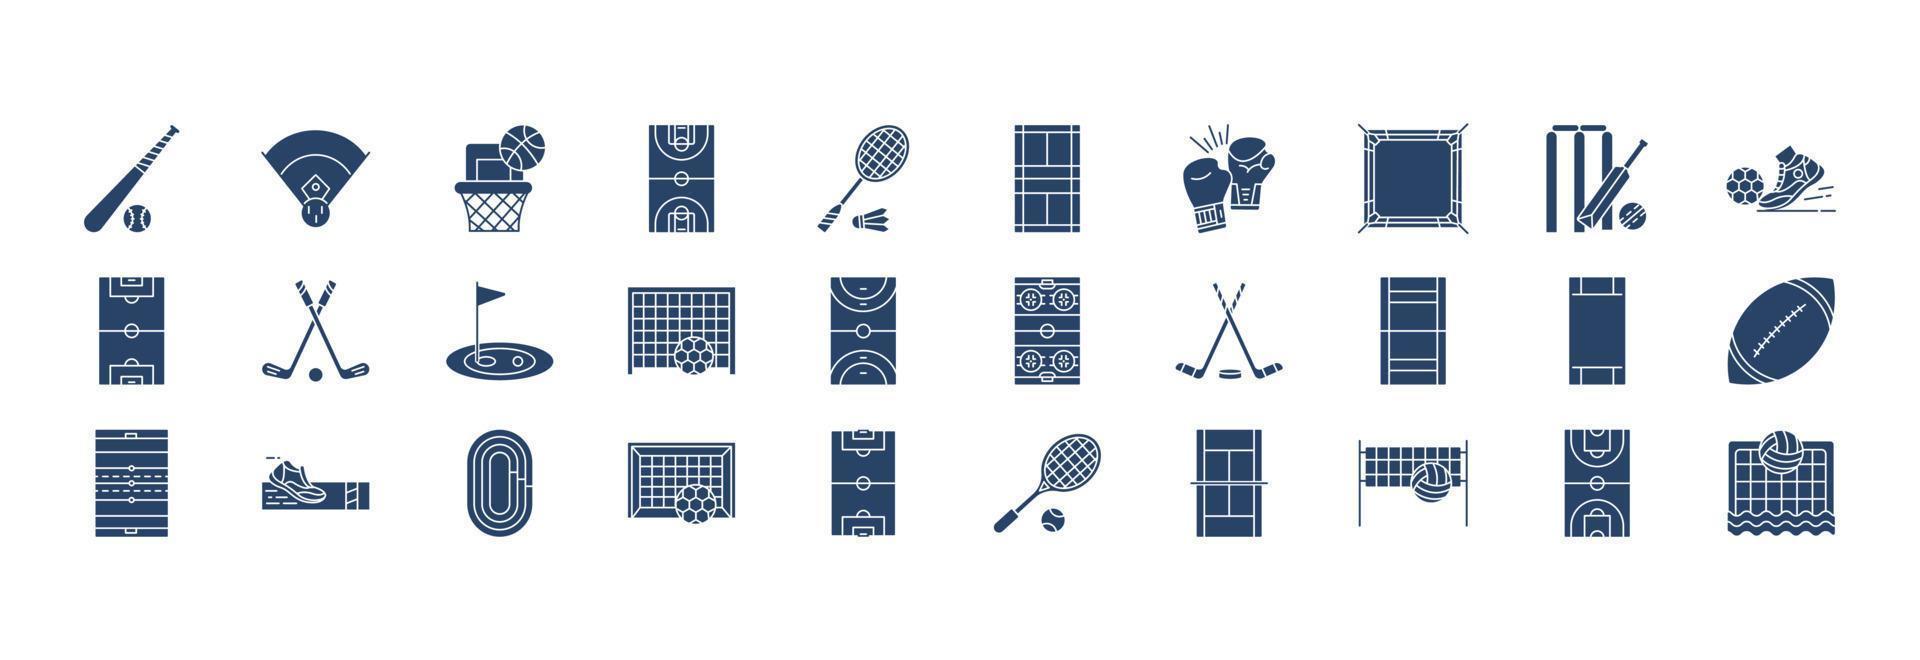 Collection of icons related to Stadiums and Games, including icons like Baseball Game, Basketball, Boxing, cricket and more. vector illustrations, Pixel Perfect set